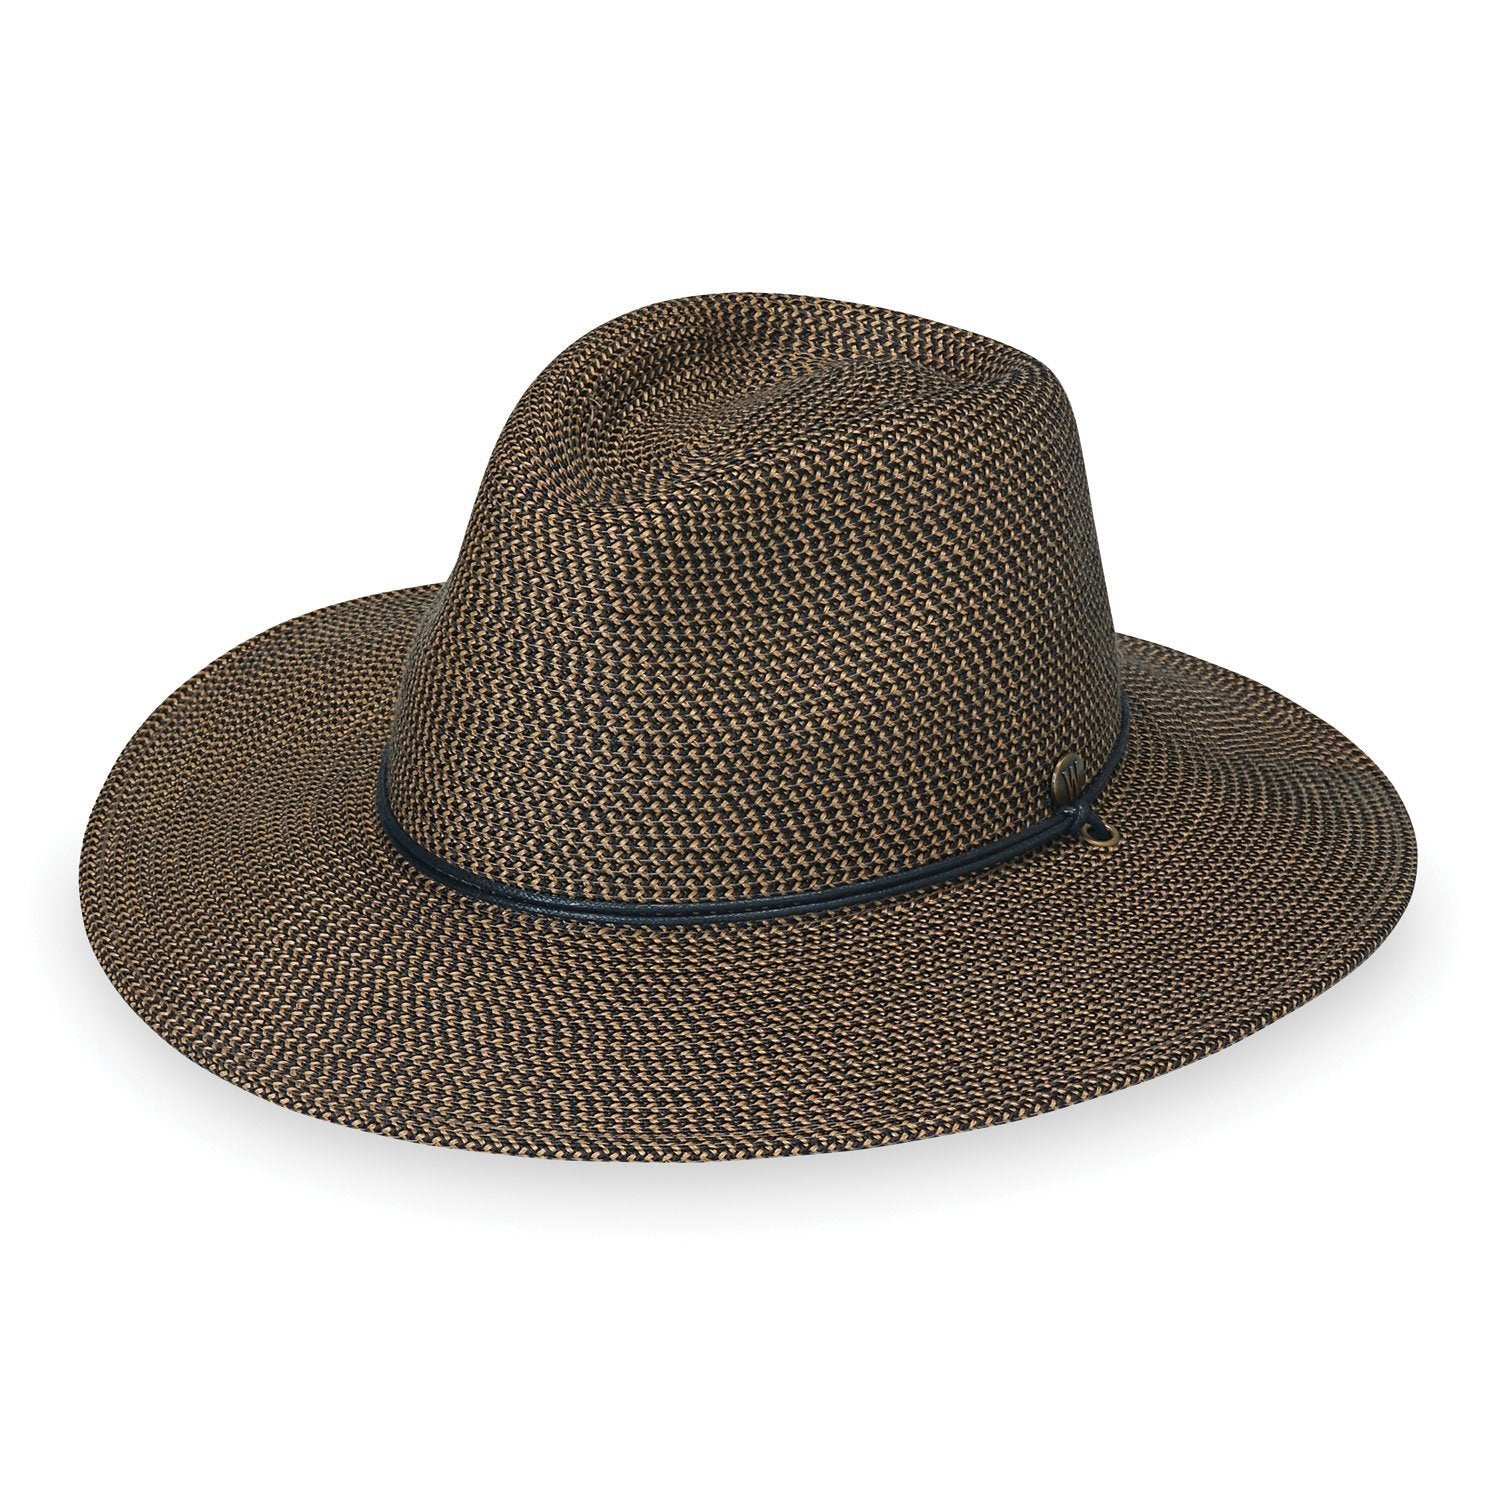 Featuring Front of Packable UPF Fedora Style Logan Sun Hat with Chinstrap in Dark Brown from Wallaroo